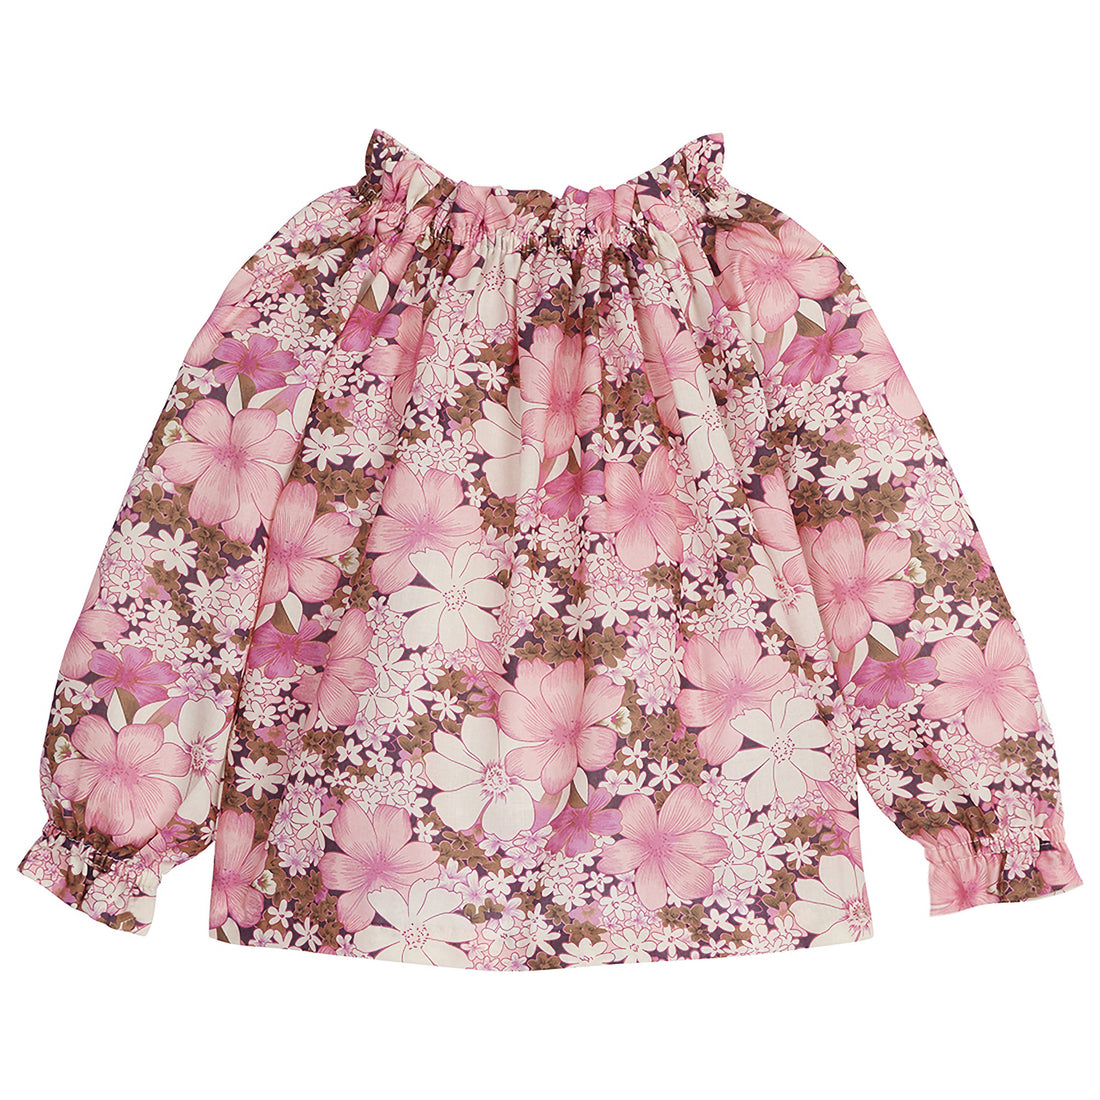 Long sleeve flowy top with hawaiin light pink/brown flowers printed on it. Ruffle on the neck and end of the sleeves--ToryTop BISBY girls/teens